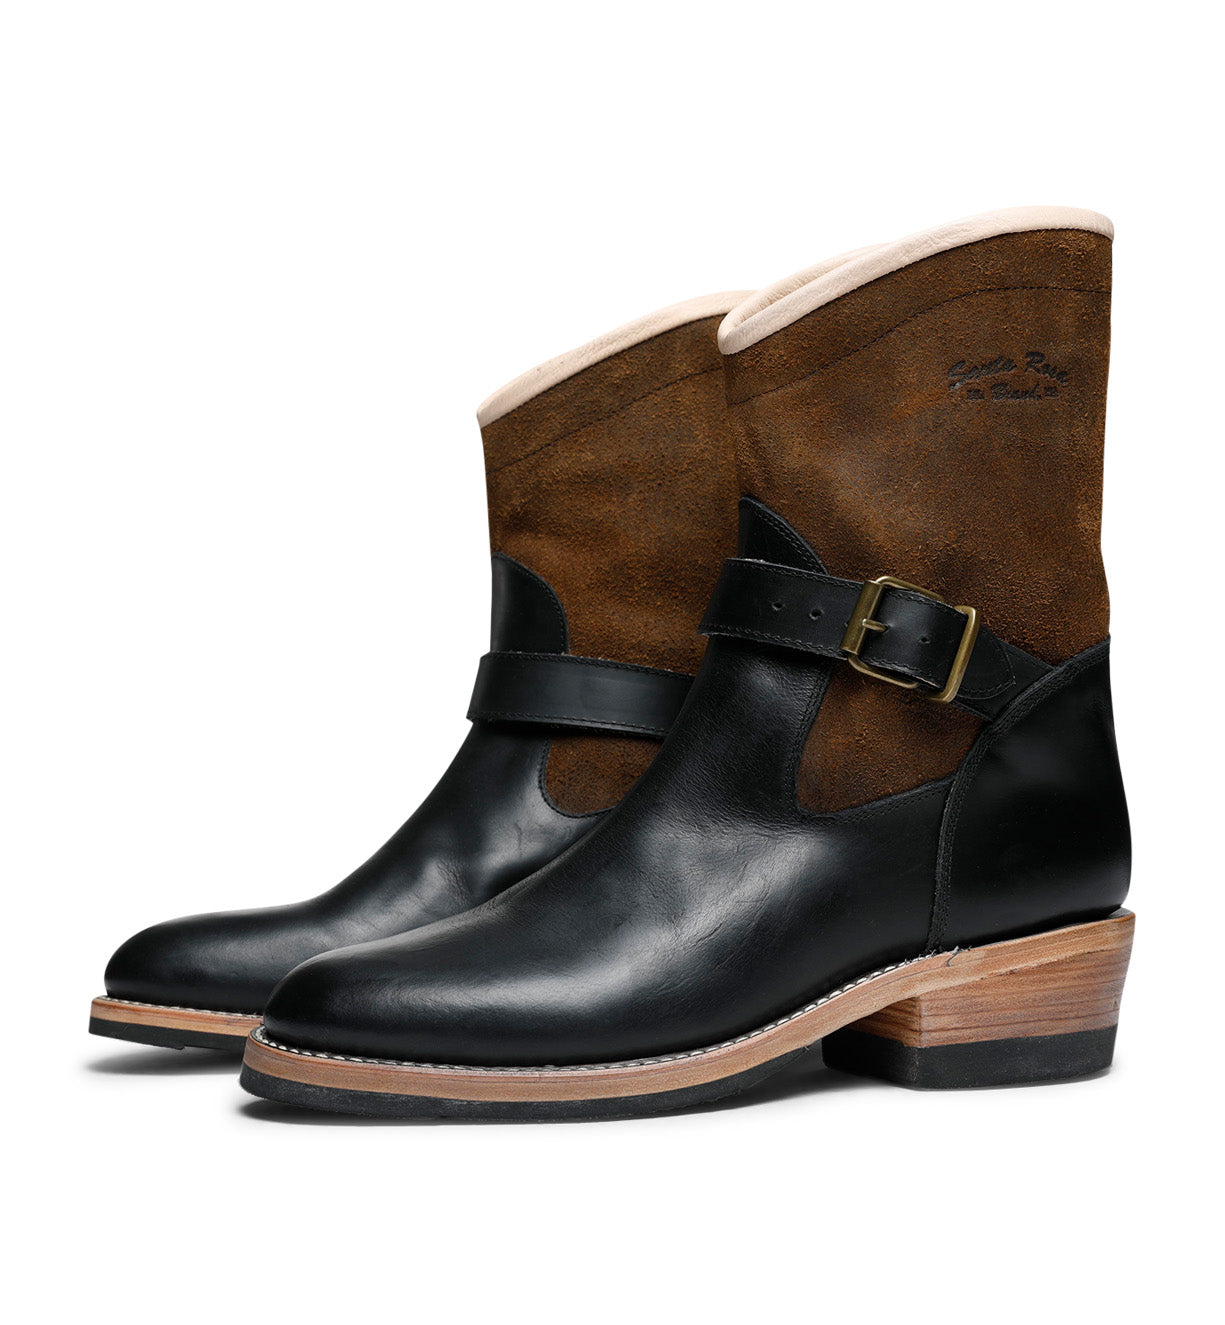 A pair of Santa Rosa Brand Carson Harness Boots in black and brown full grain leather with buckle detail.